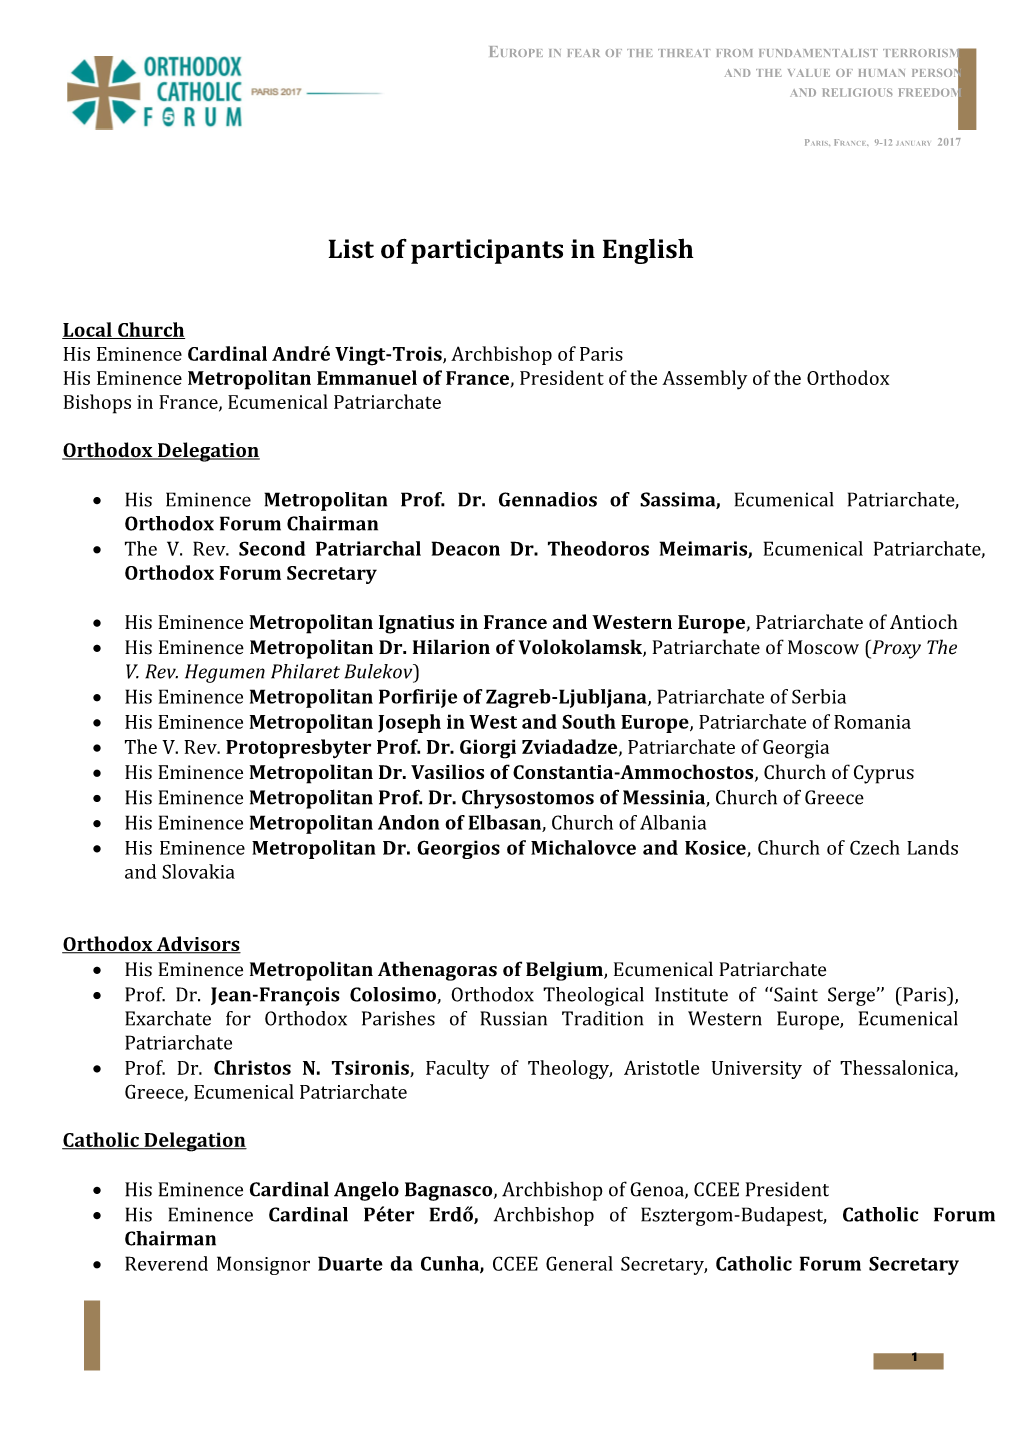 List of Participants in English